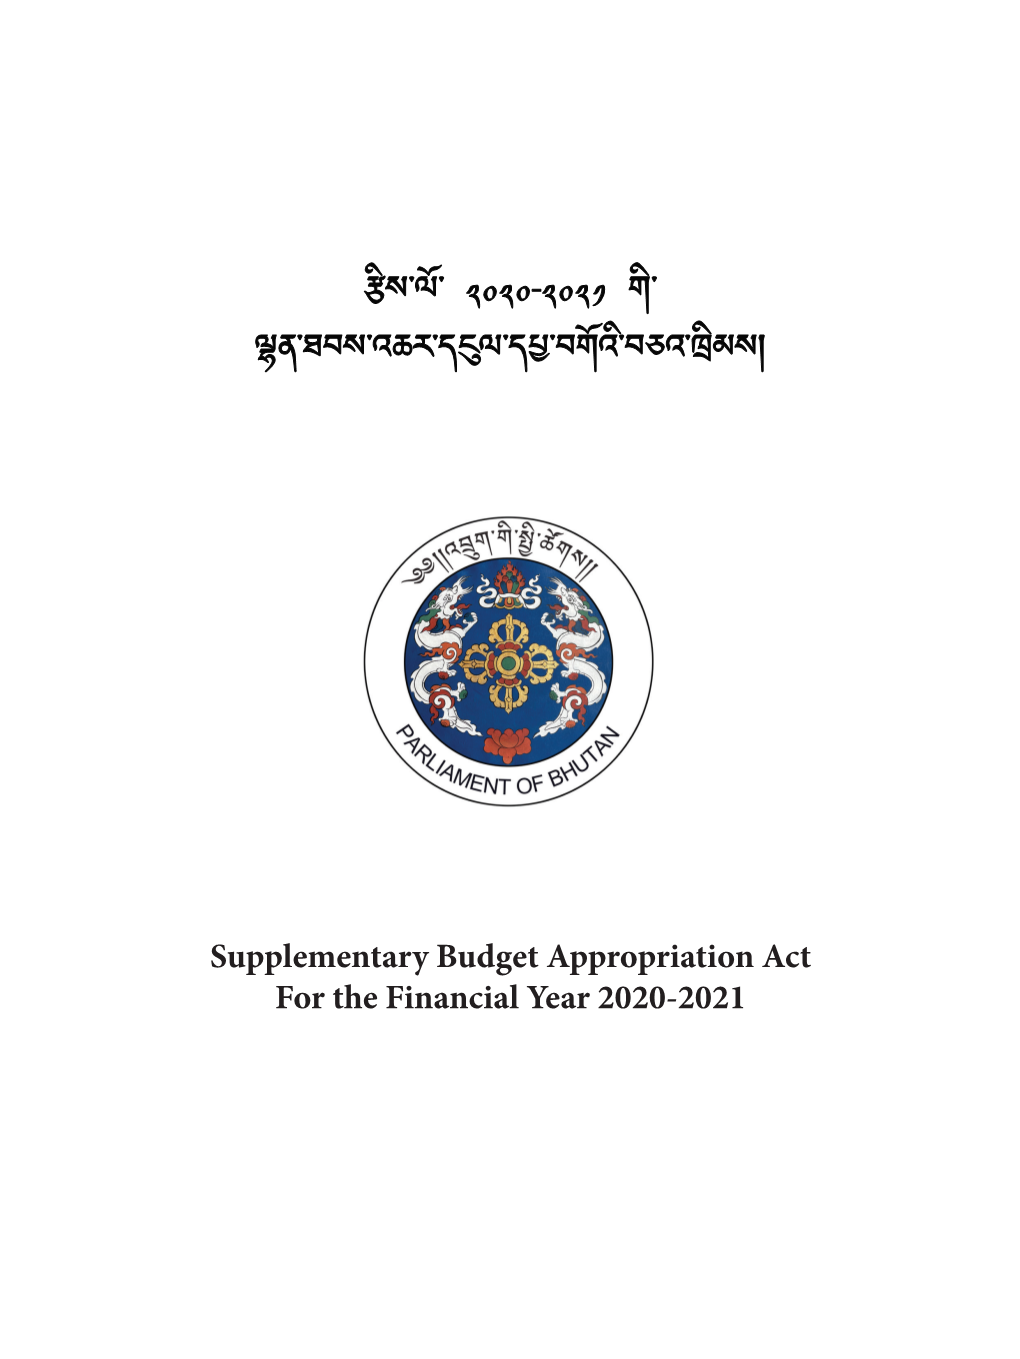 Supplementary Budget Appropriation Act for the Financial Year 2020-2021 PREAMBLE